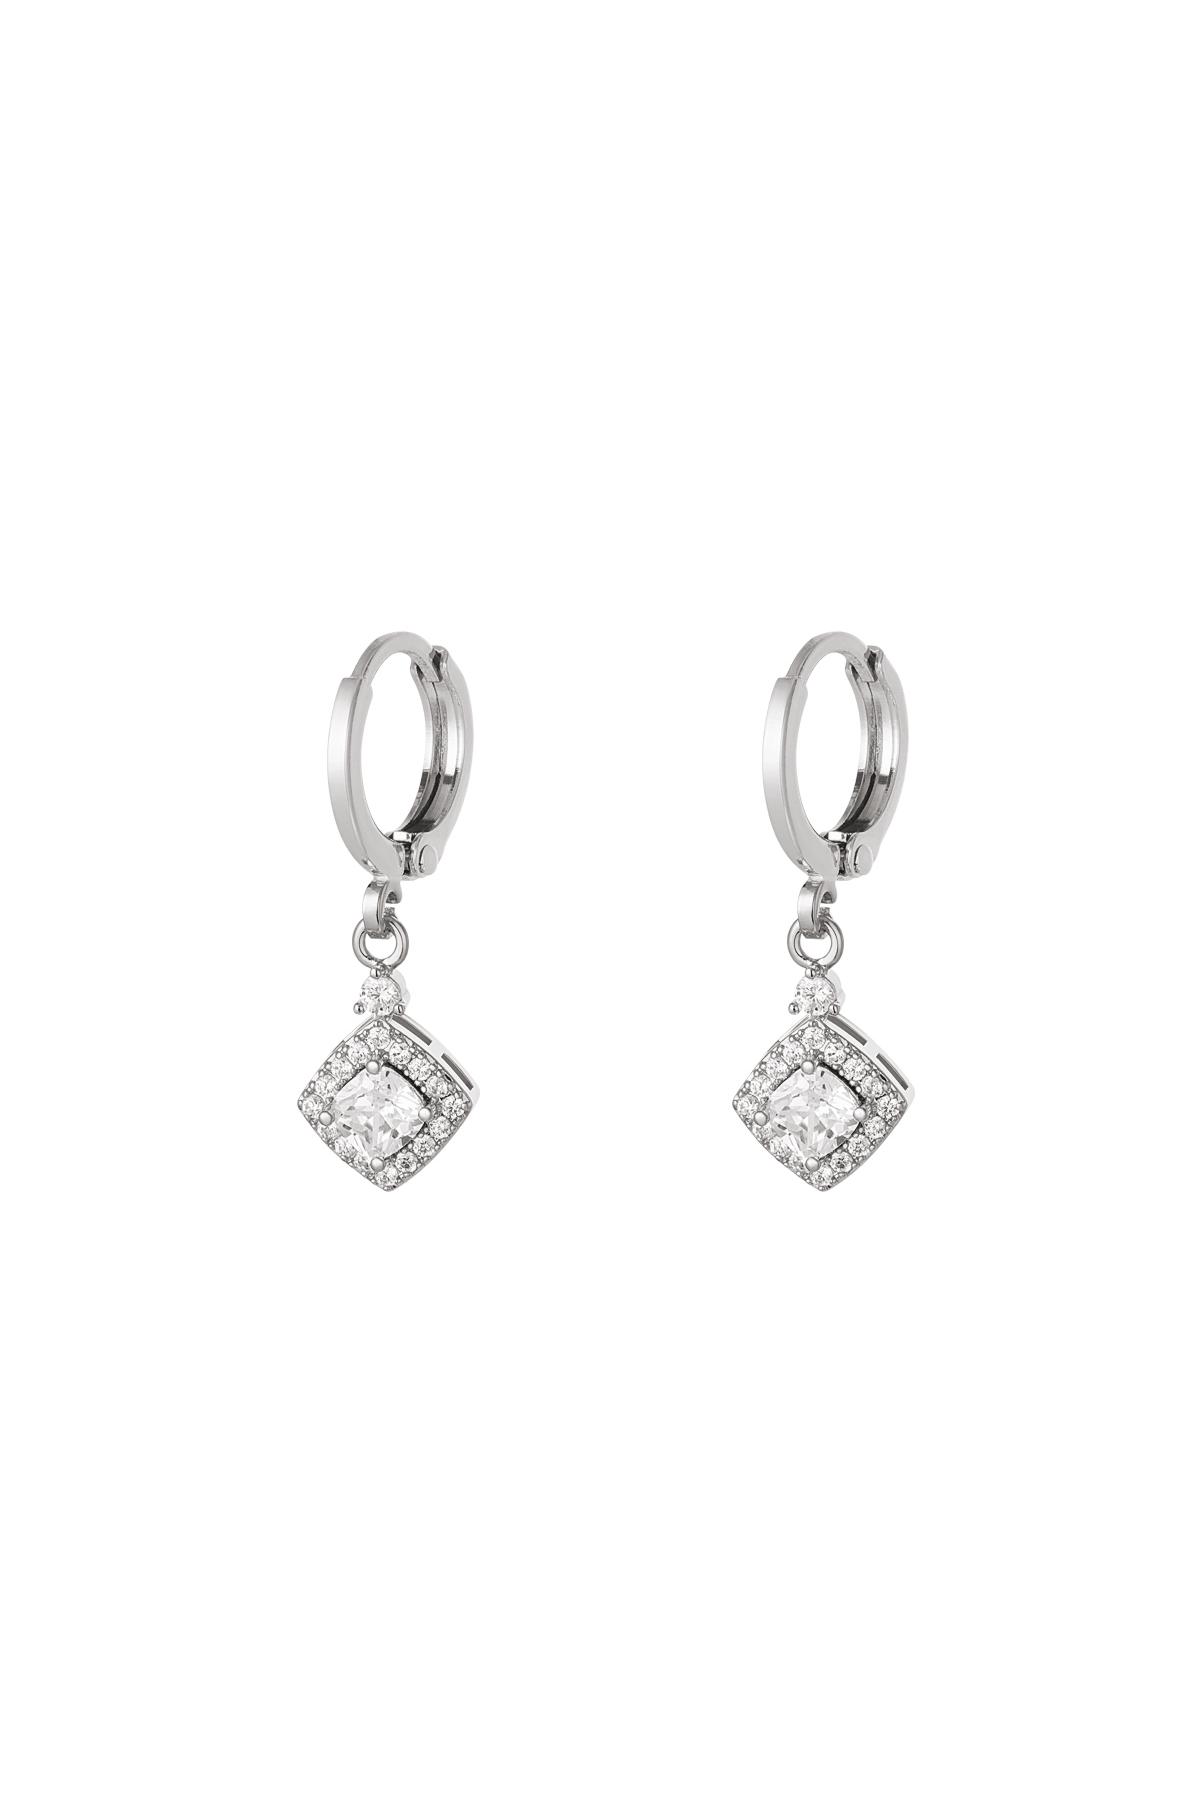 Earrings with zirconia pendant - Sparkle Collection Silver Copper h5 